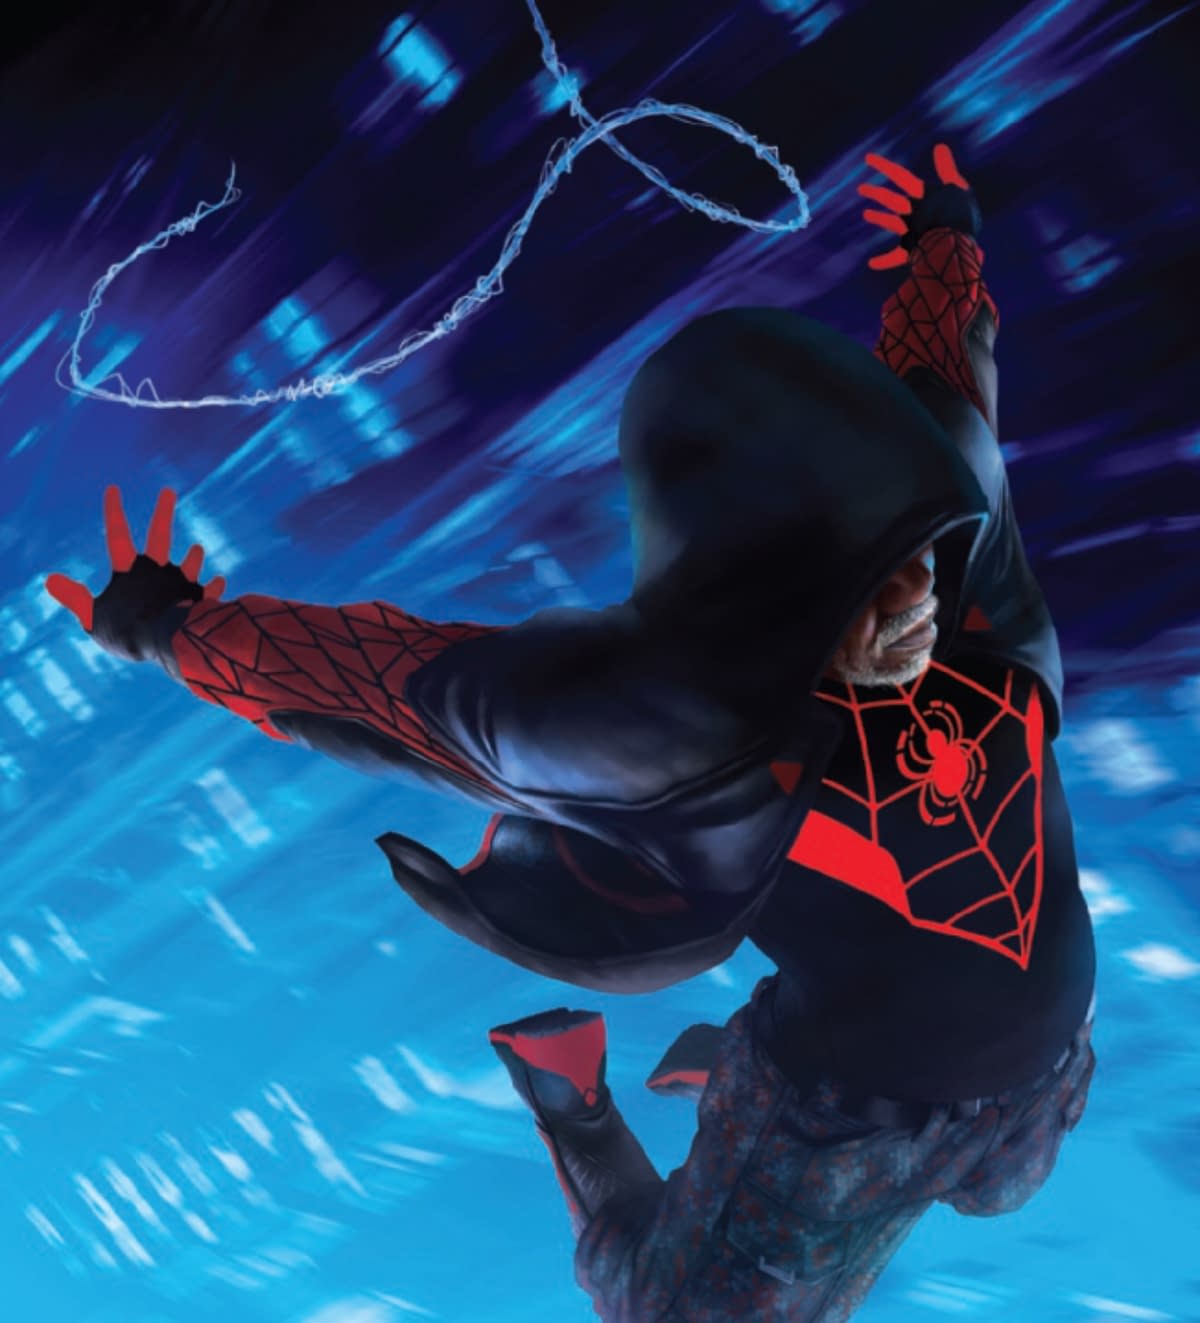 REVIEW: Miles Morales The End #1 -- "A Fitting Send Off For A Hero Just Starting To Forge A Legacy"